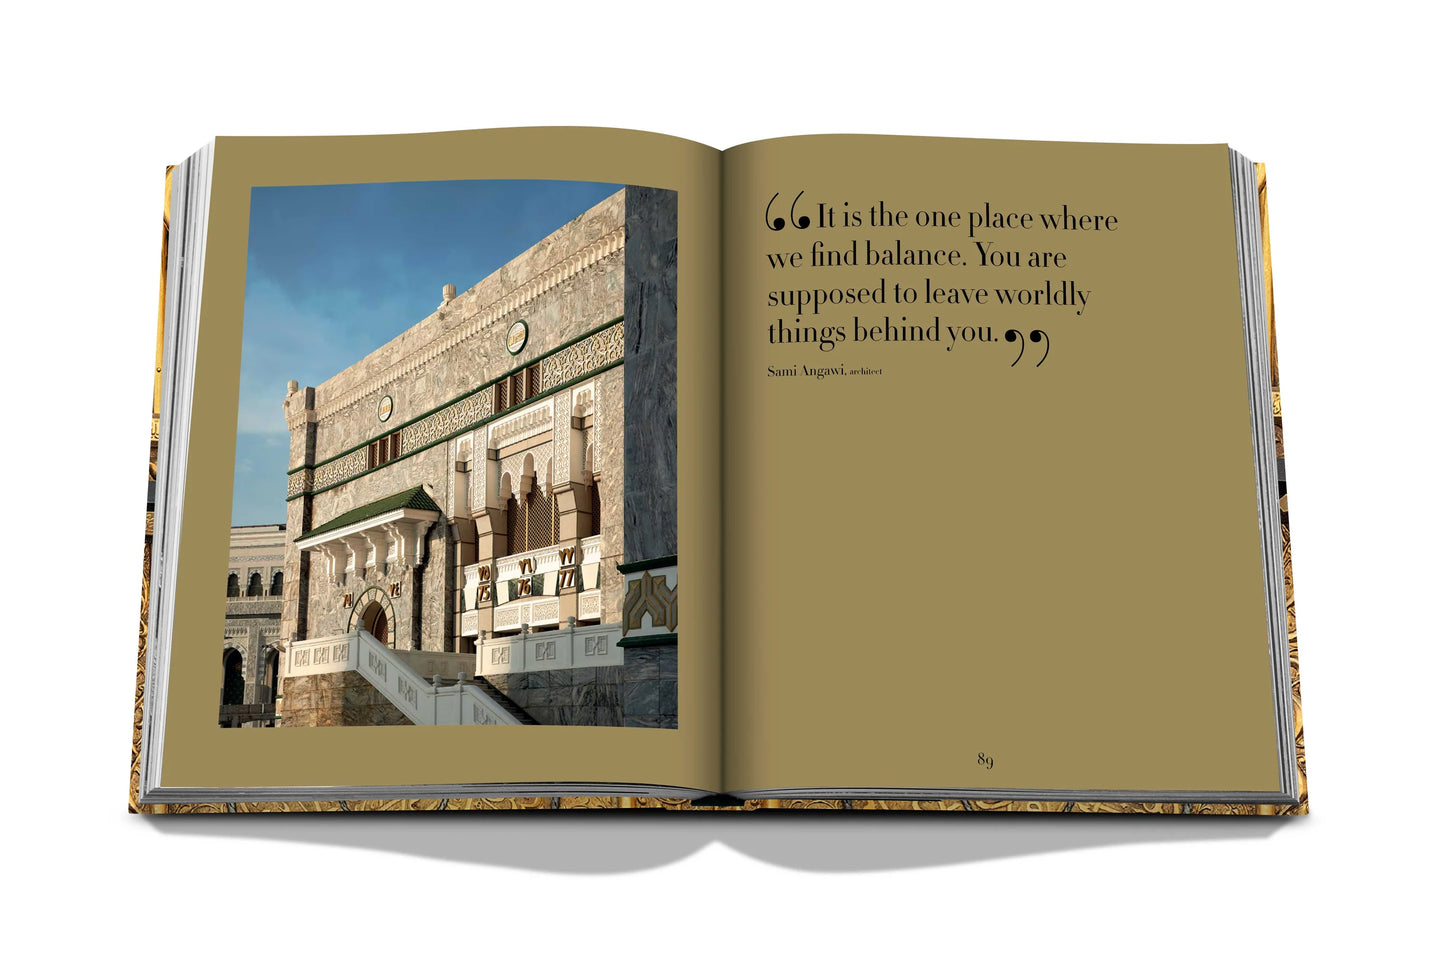 Livre Makkah - The Holy City of Islam : Impossible Collection